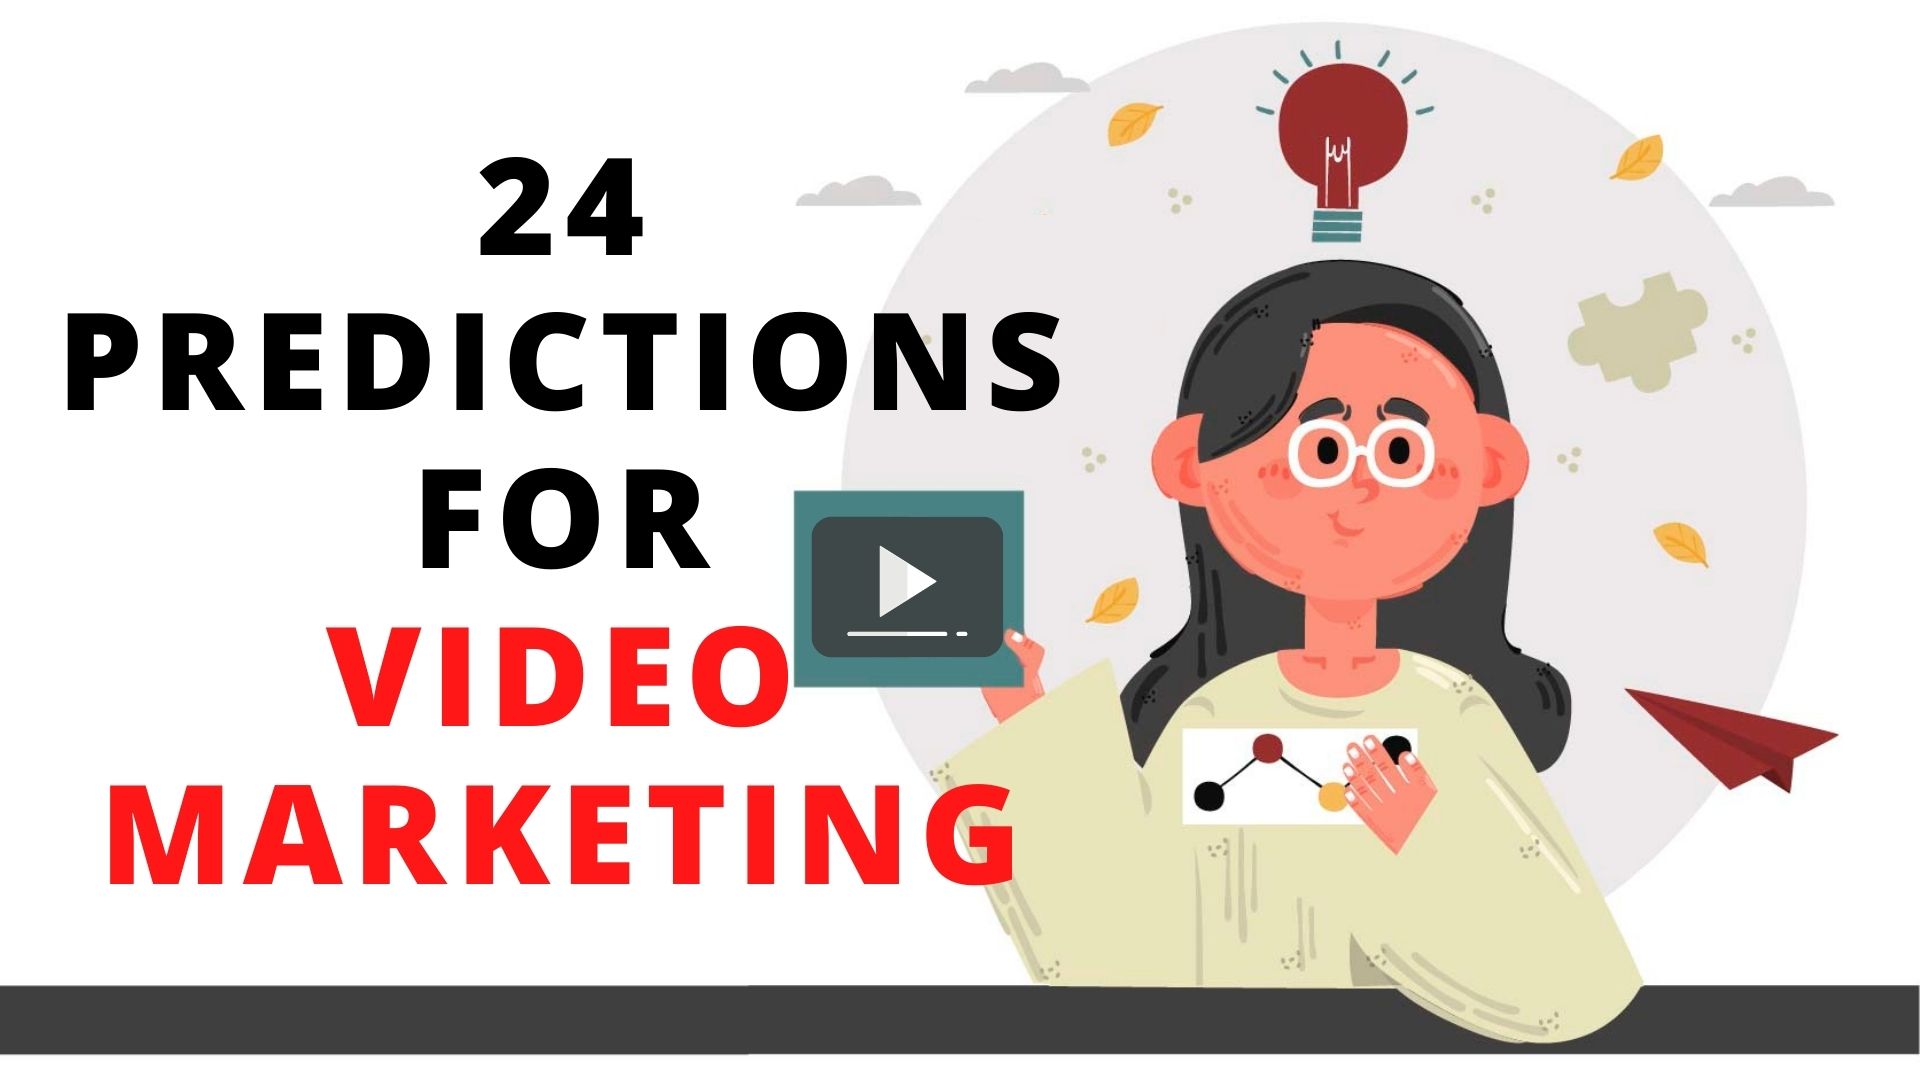 24 predictions for video marketing